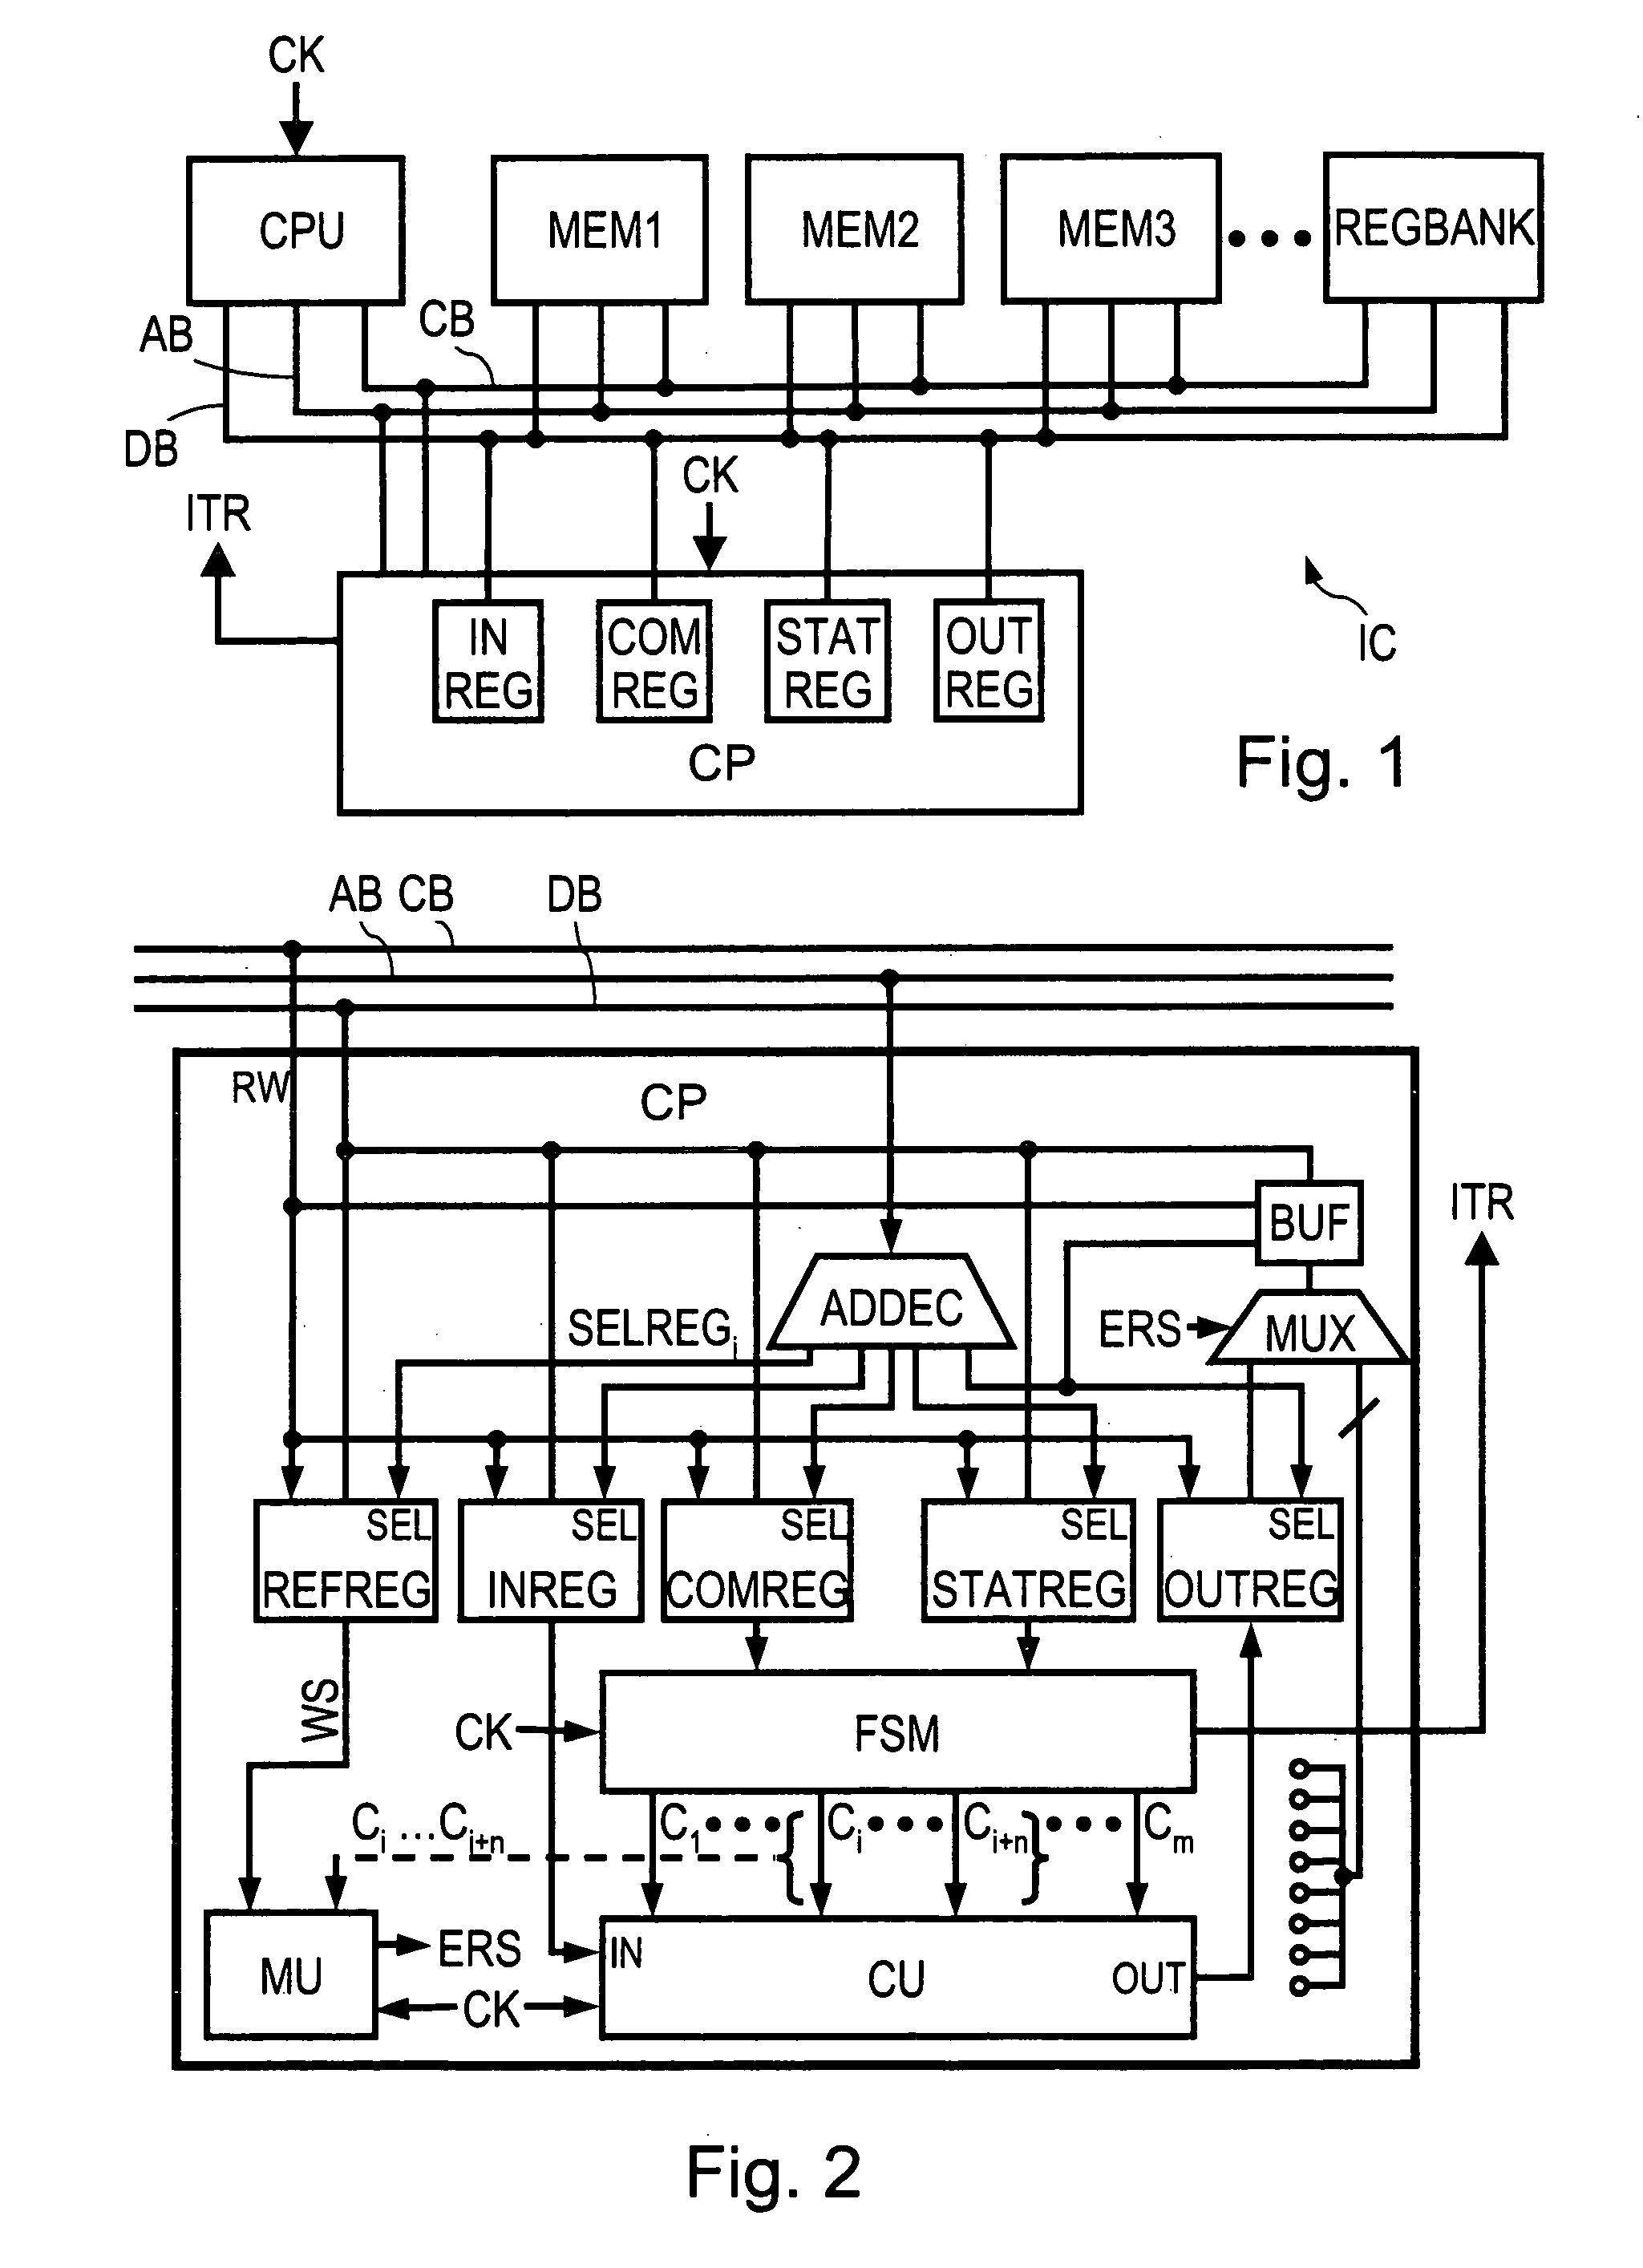 Secured coprocessor comprising means for preventing access to a unit of the coprocessor